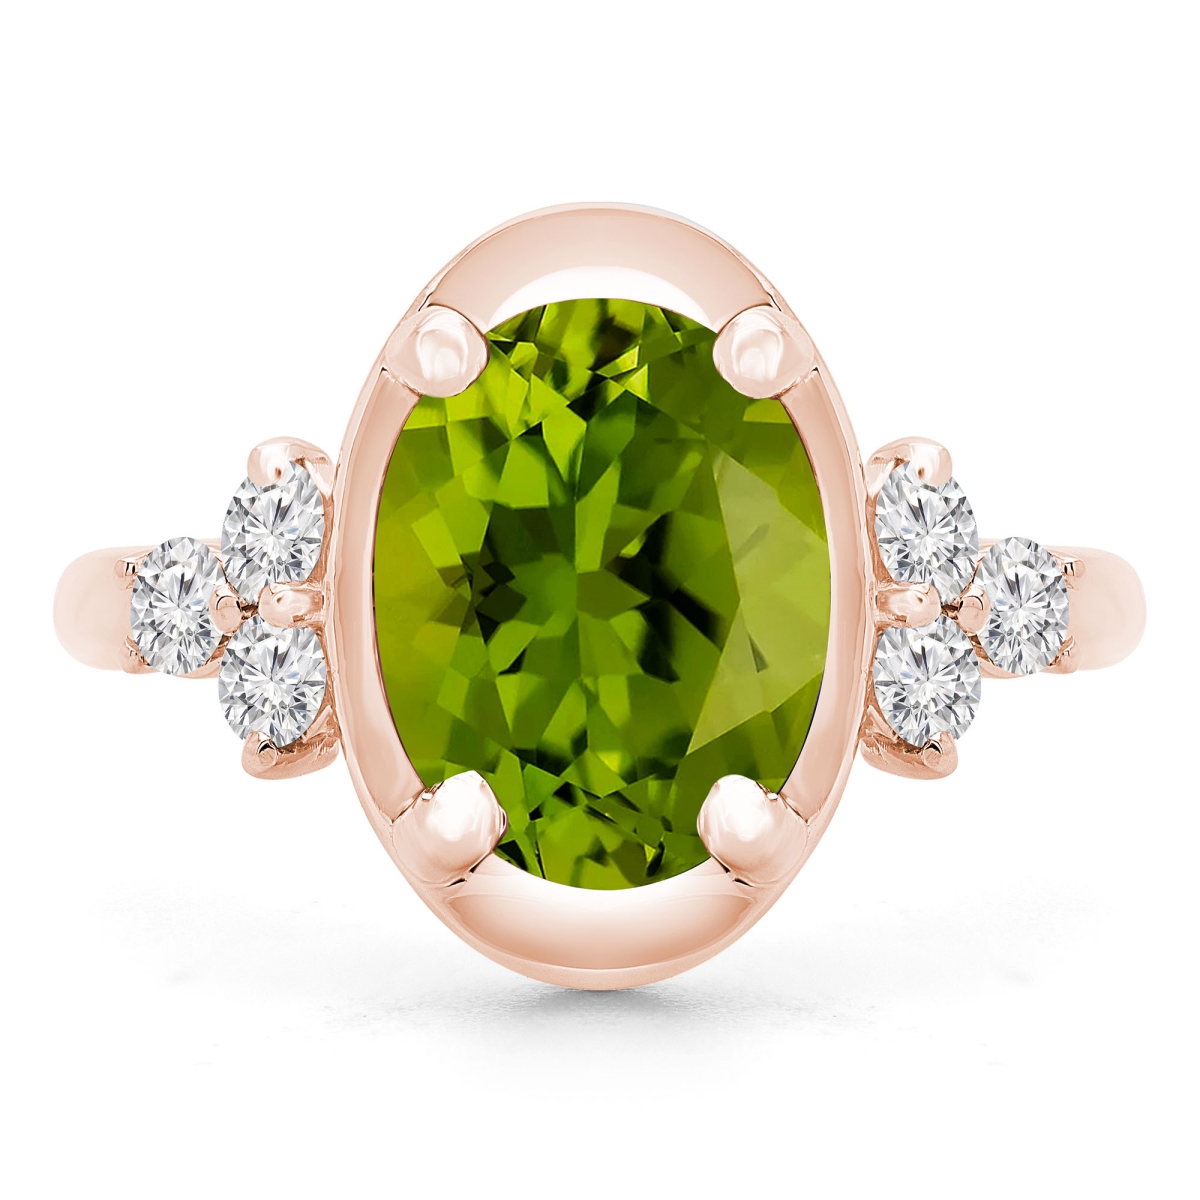 Picture of Majesty Diamonds MD190412-3 3.9 CTW Oval Green Peridot Cocktail Ring in 14K Rose Gold - Size 3